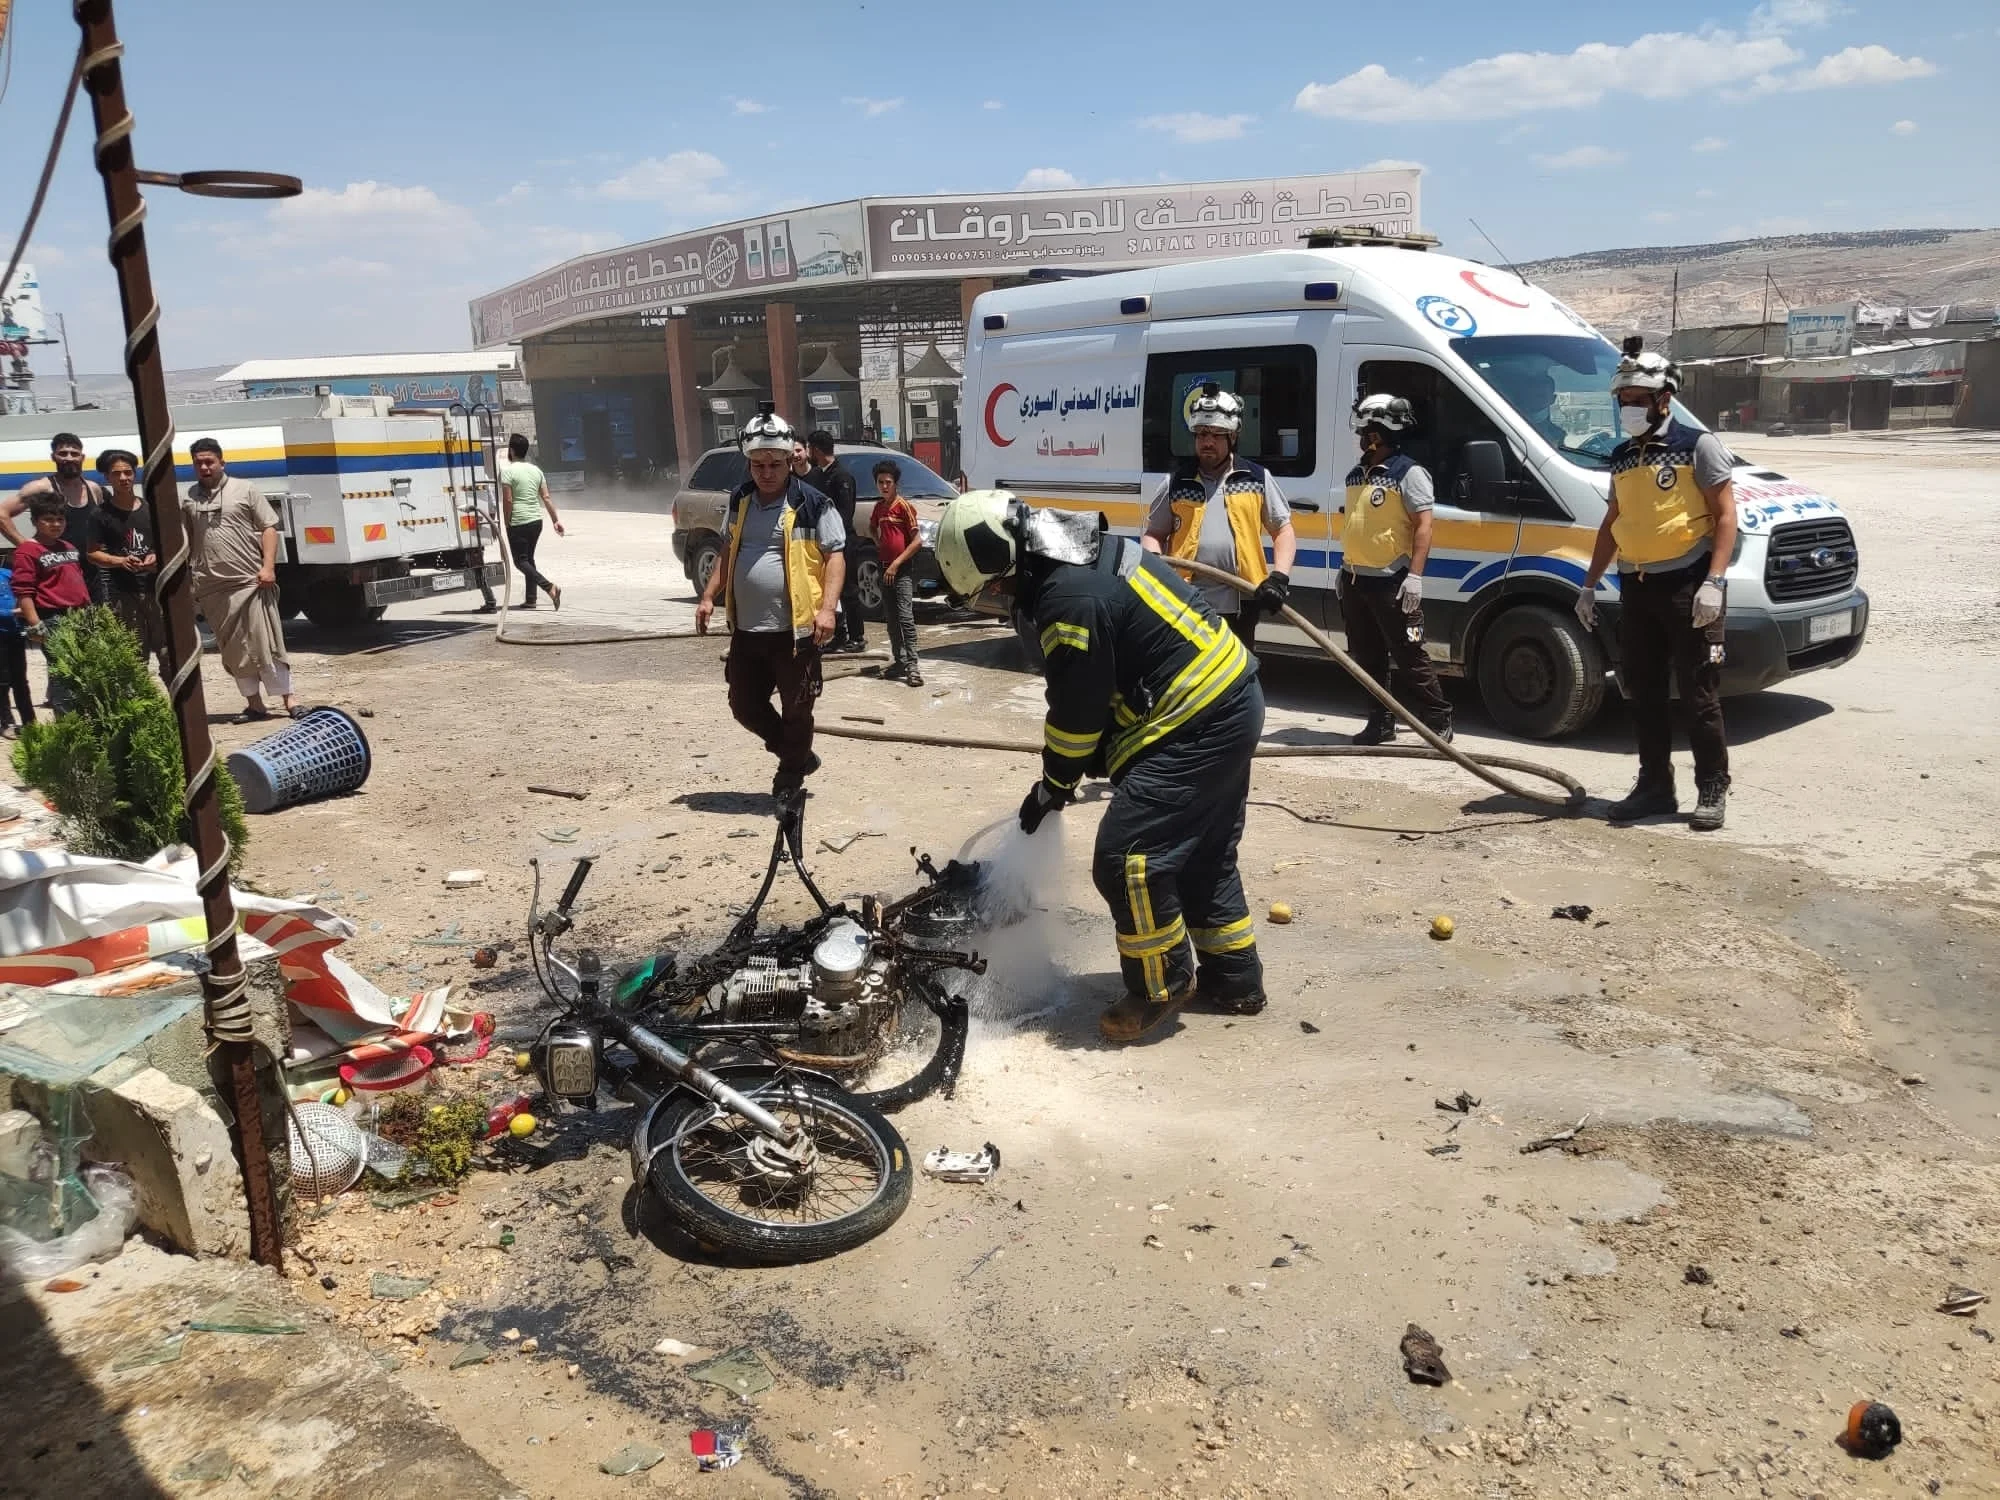 Several civilians wounded in an explosion of a motorbike-bomb in northern Aleppo on May 28